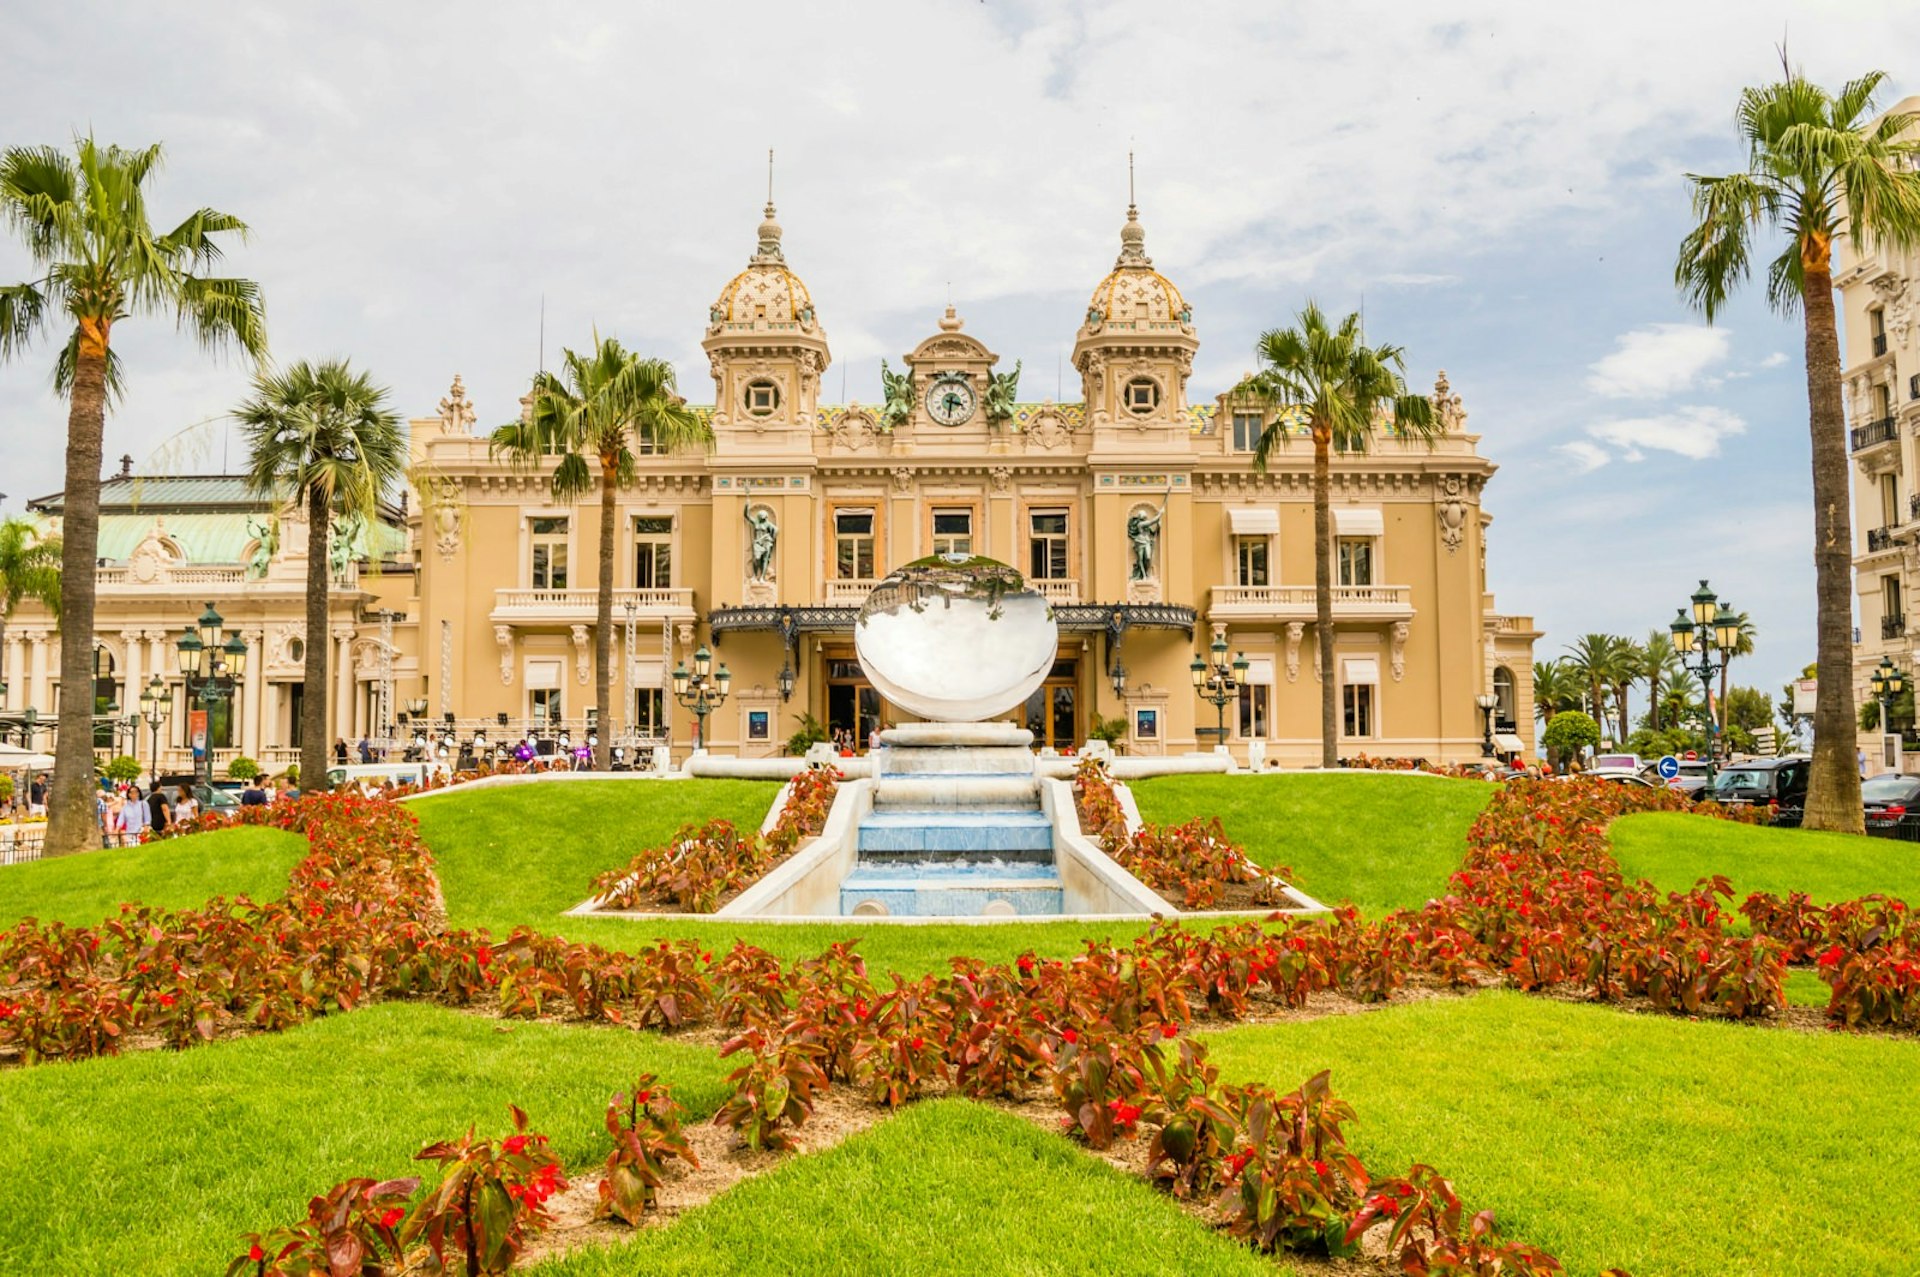 The Casino de Monte-Carlo seen from out the front